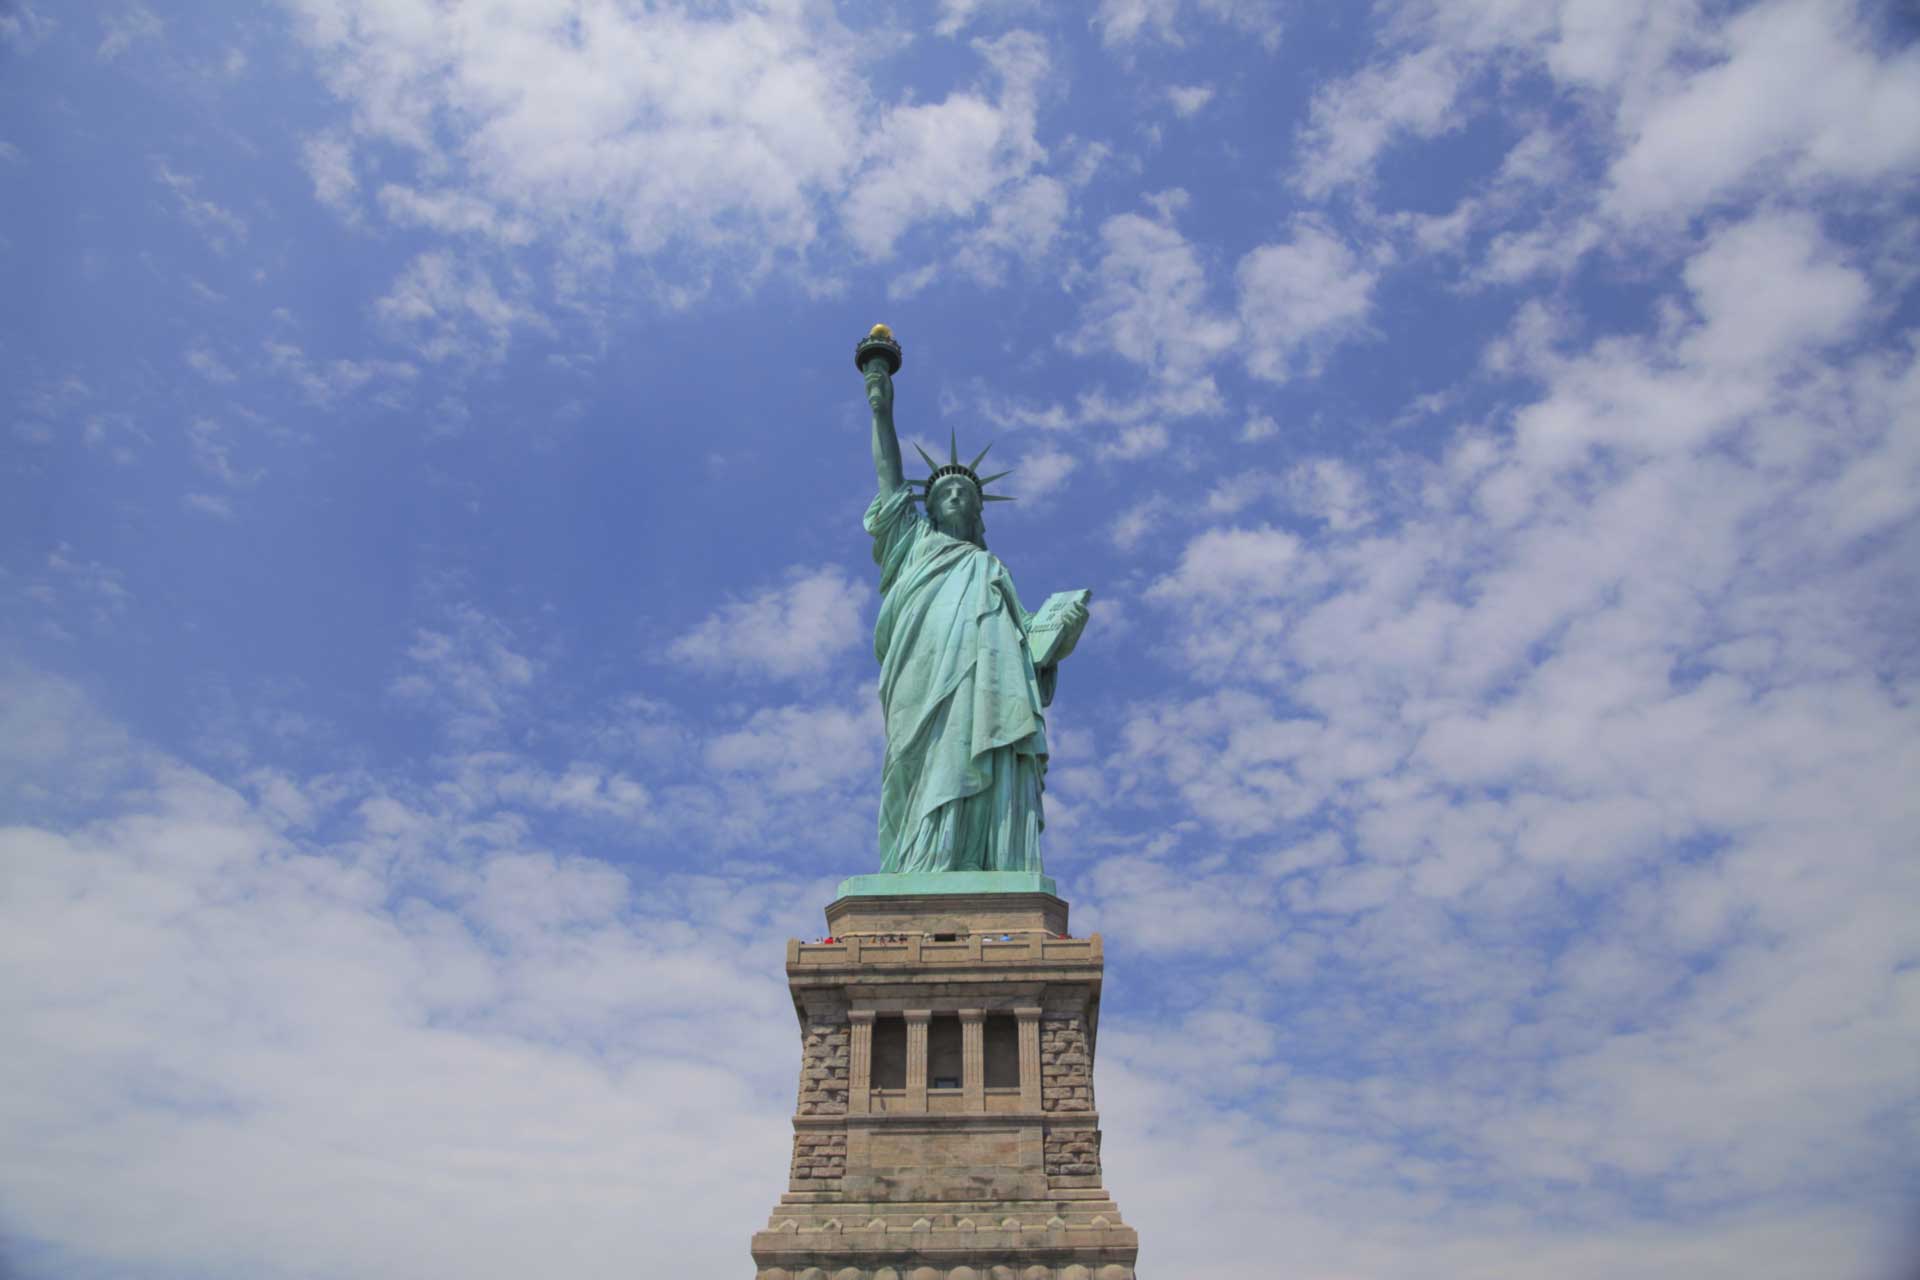 Statue of Liberty Tickets and Tours from New York and New Jersey